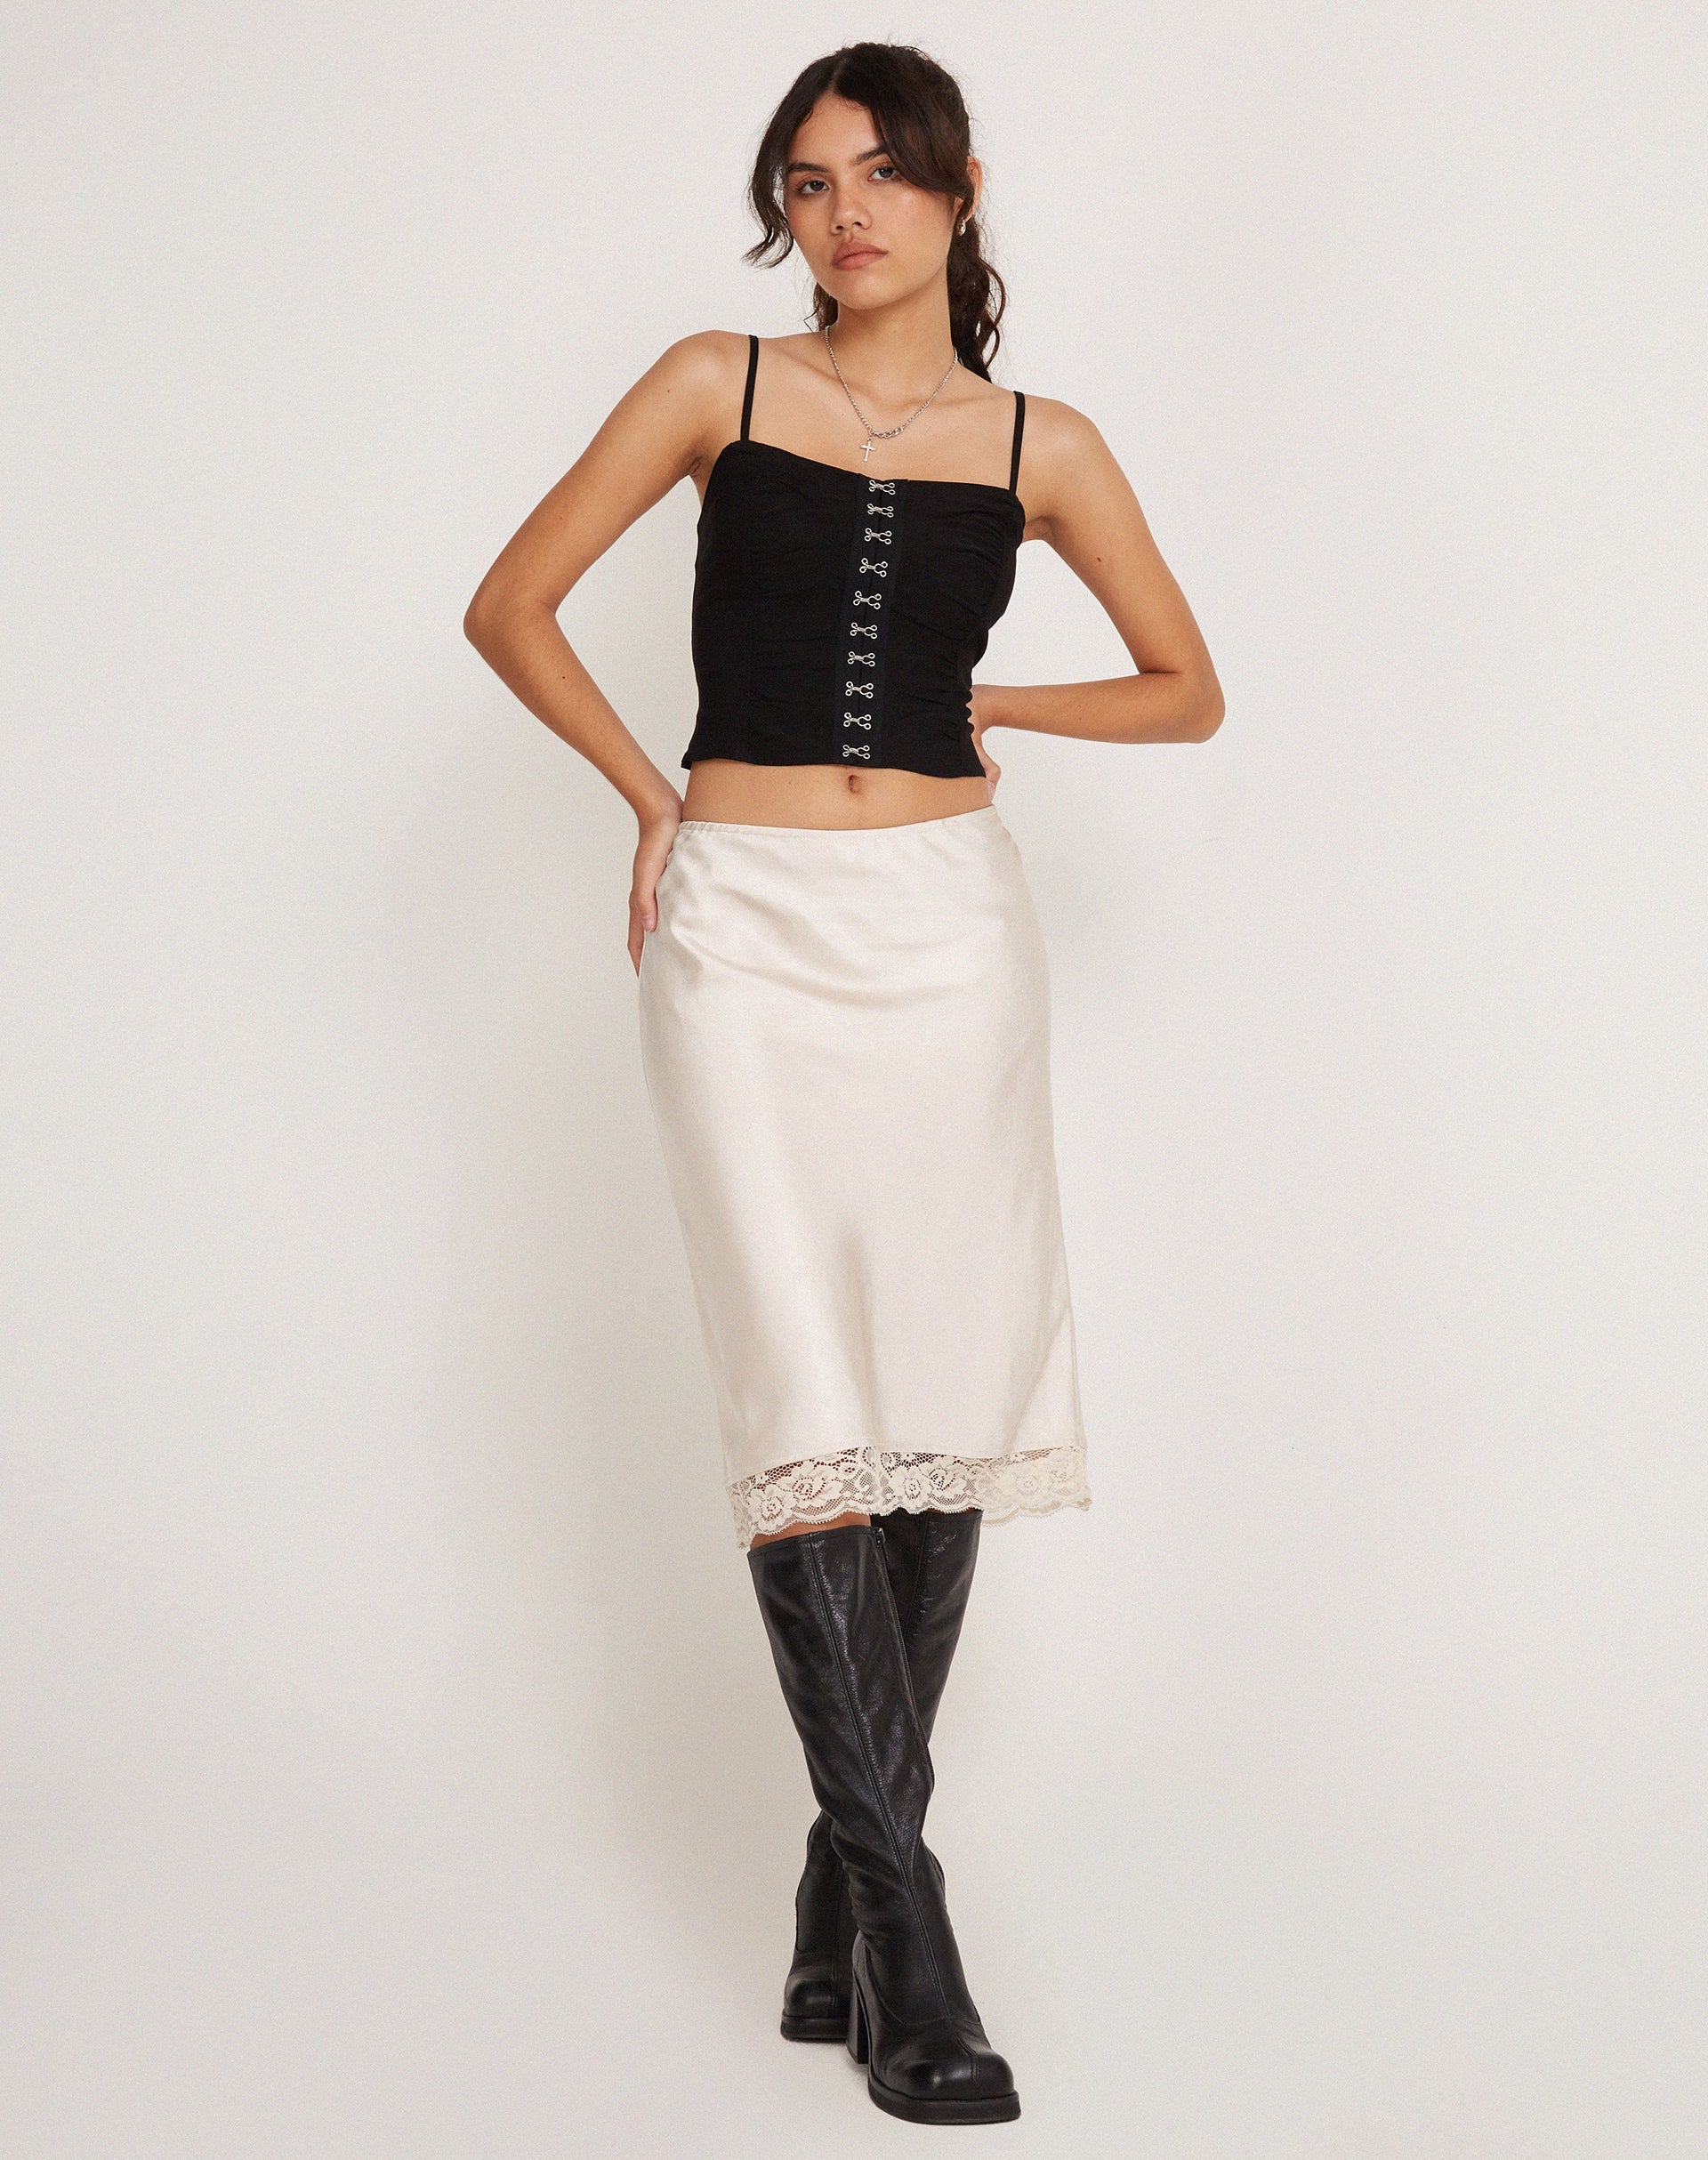 Image of Resira Midi Skirt in Satin Pearled Ivory with Lace